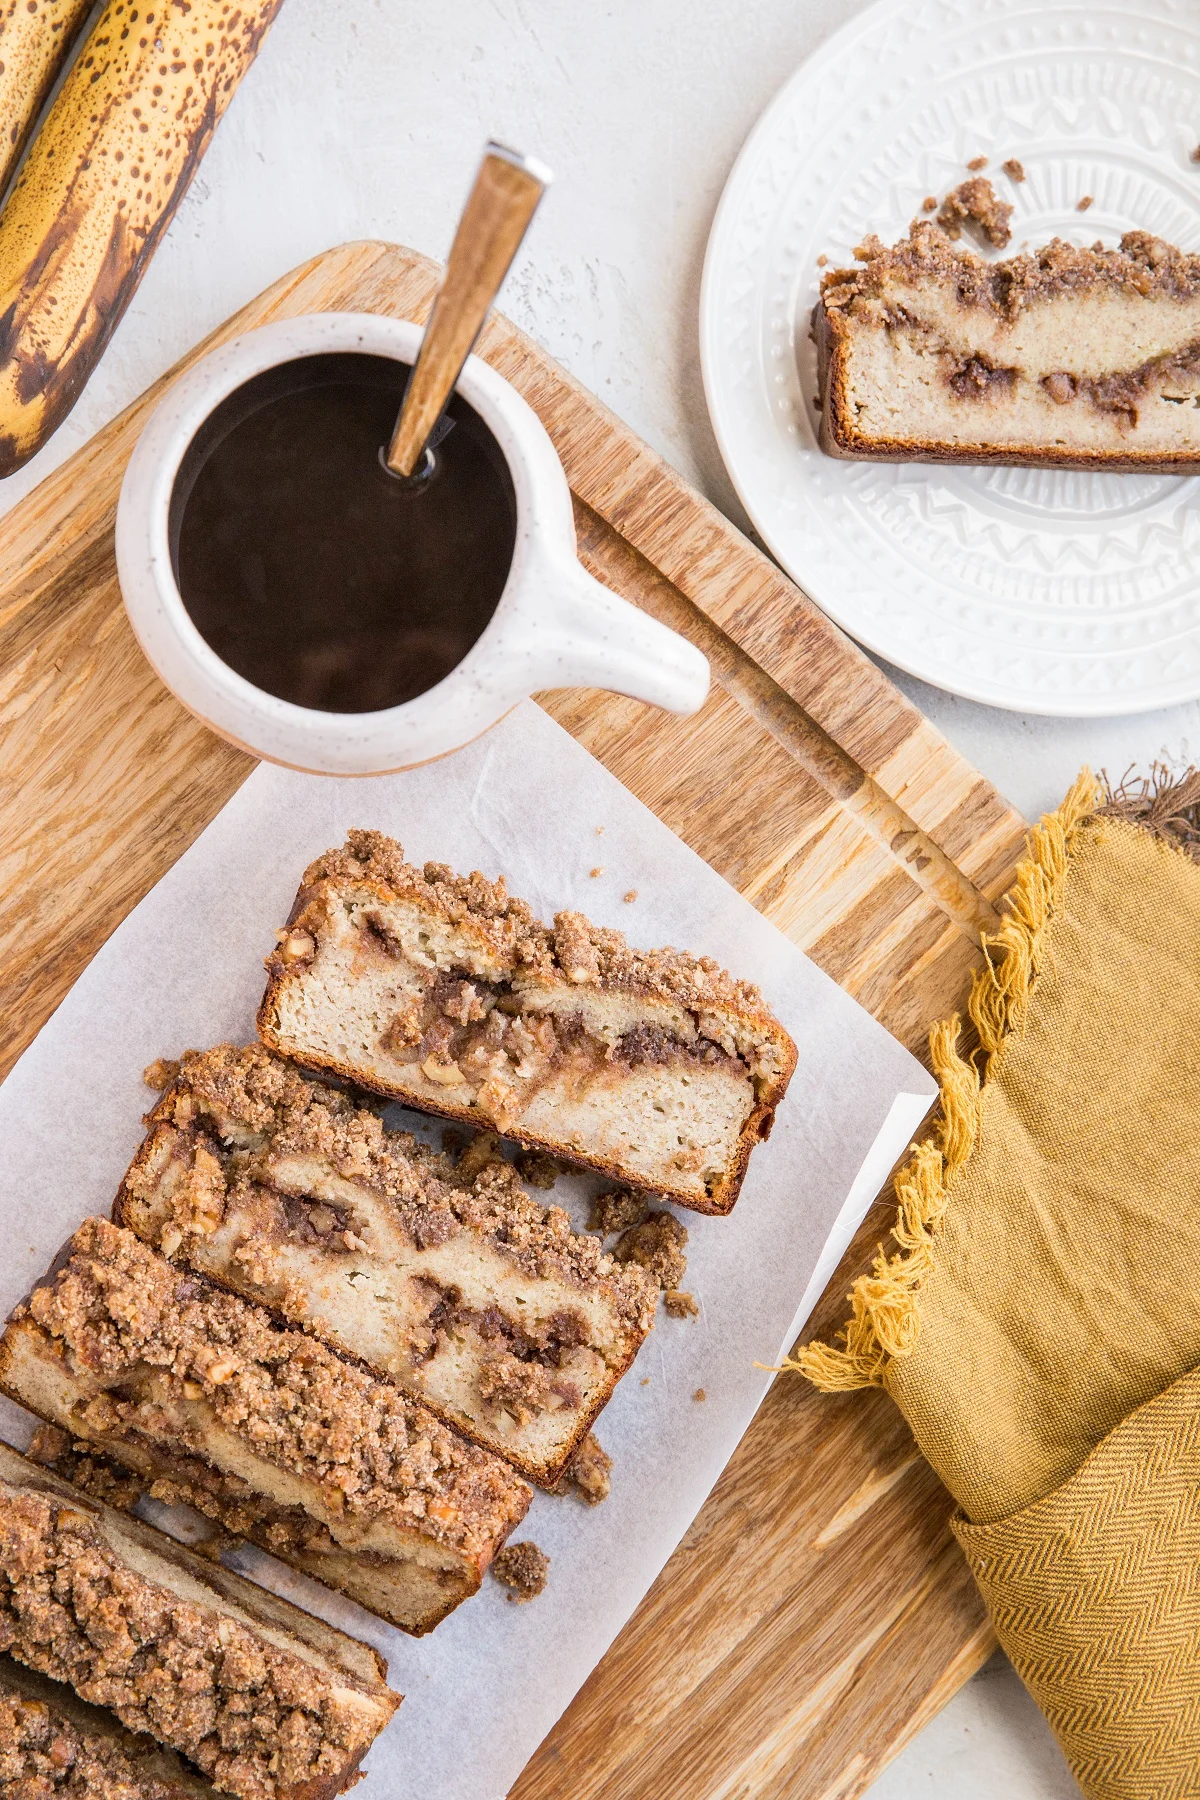 Grain-Free Cinnamon Swirl Banana Bread made paleo-friendly with almond flour and pure maple syrup.